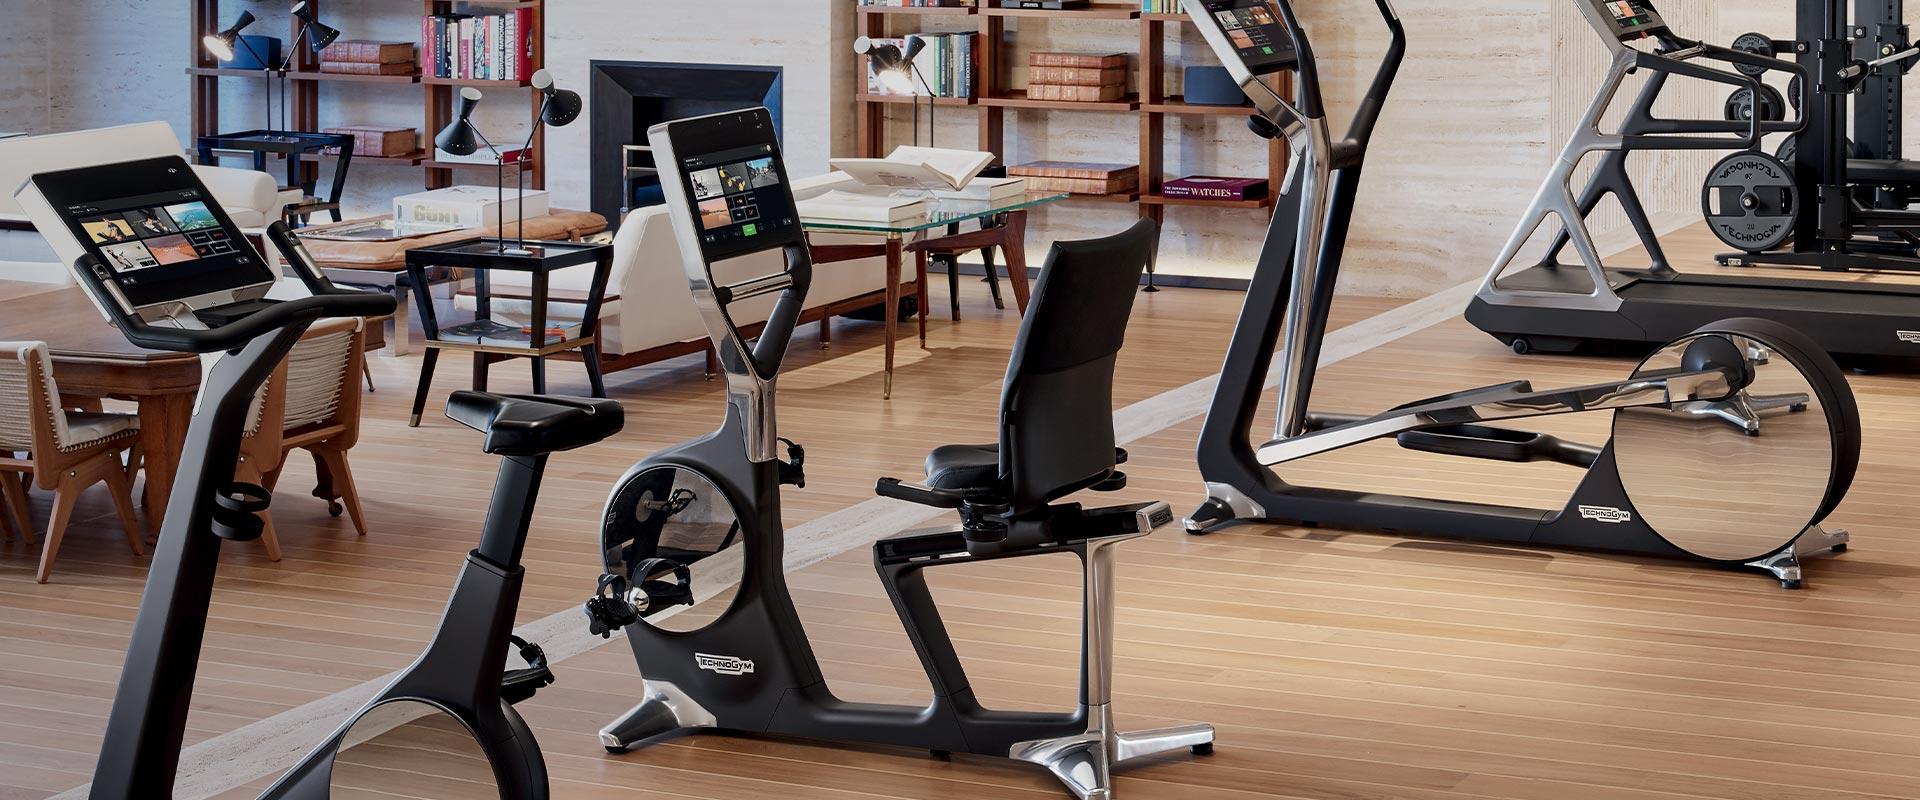 WELLNESS HOLDING S.R.L. – SALE OF ORDINARY SHARES OF TECHNOGYM S.P.A. THROUGH AN ACCELERATED BOOKBUILDING ADDRESSED TO INSTITUTIONAL INVESTORS